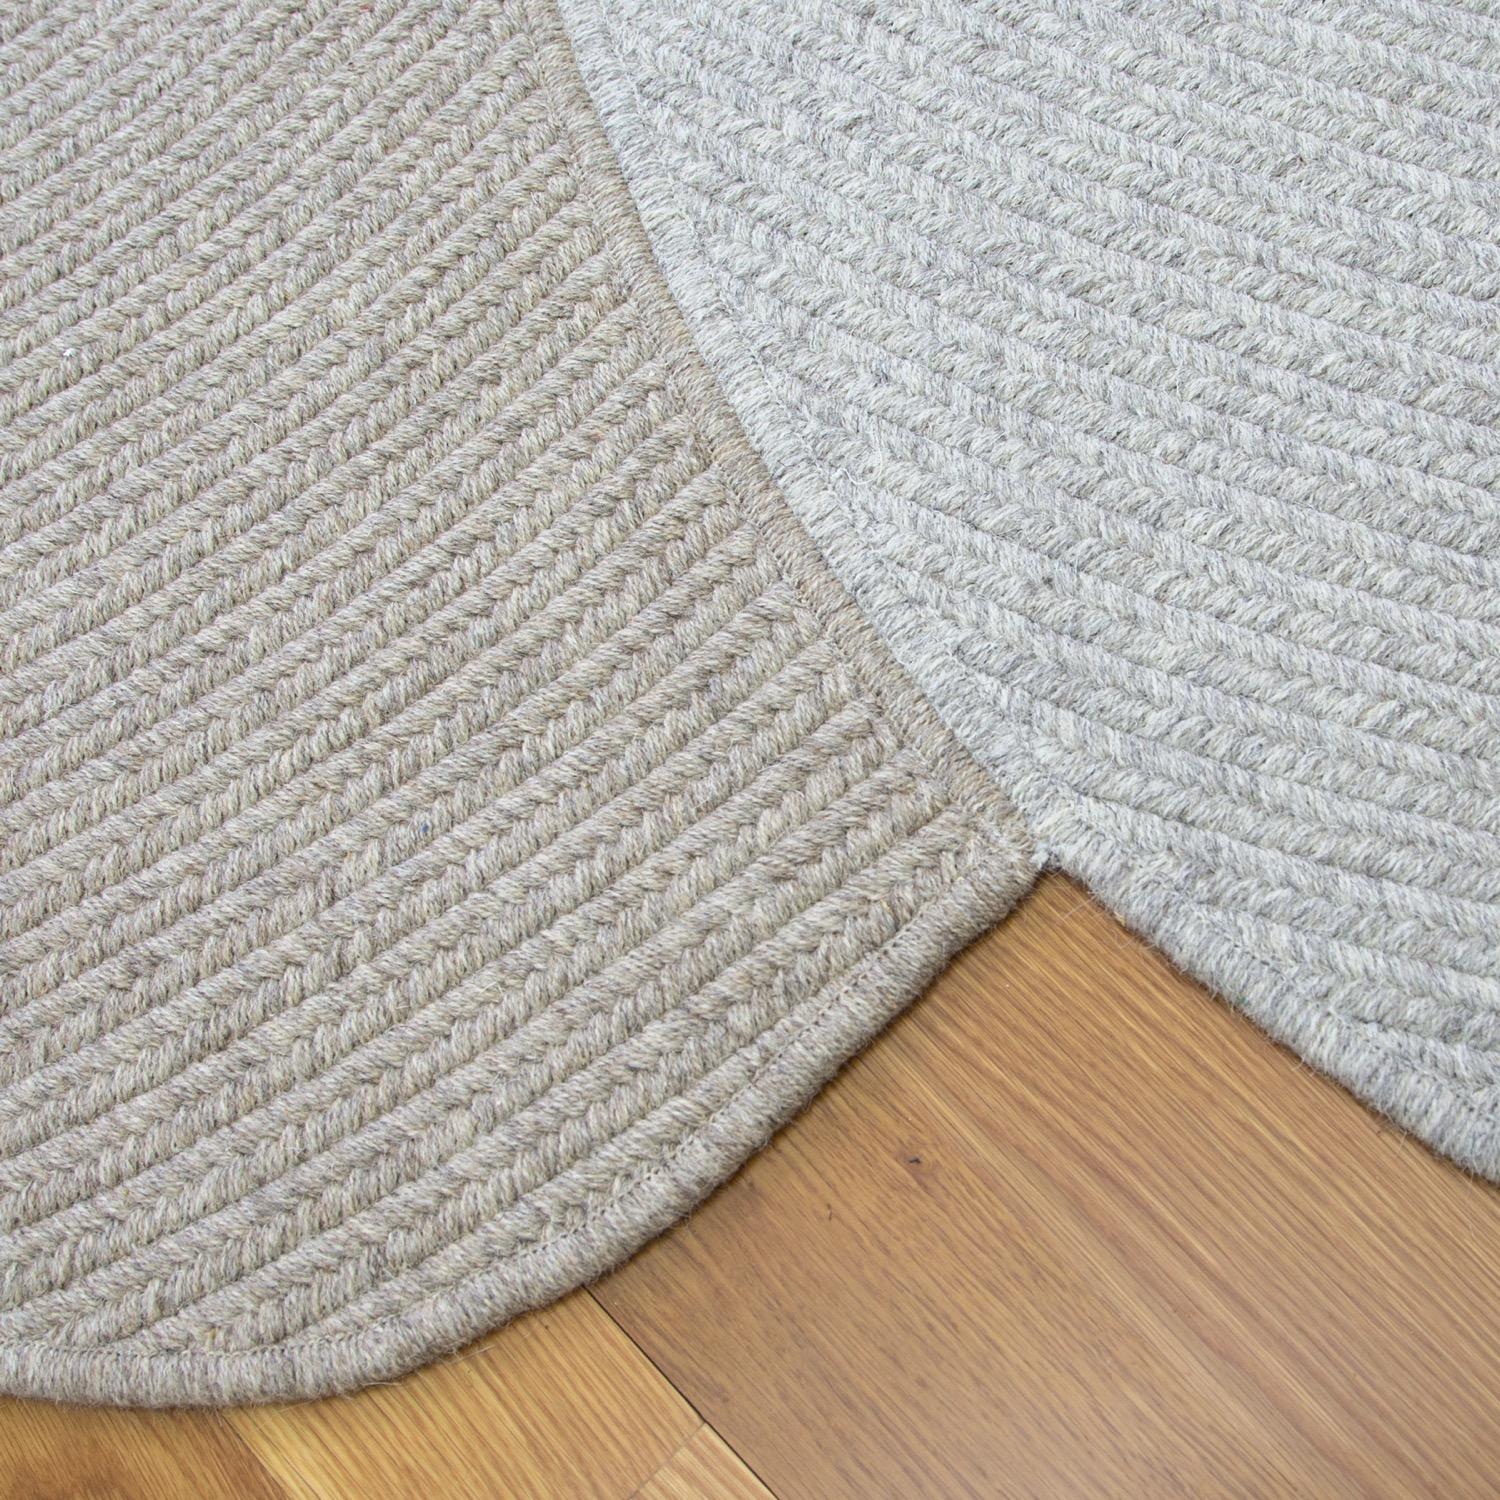 Riff Rug from Souda, Customizable, 8x10 ft, Natural Wool, Light Grey In New Condition For Sale In Brooklyn, NY